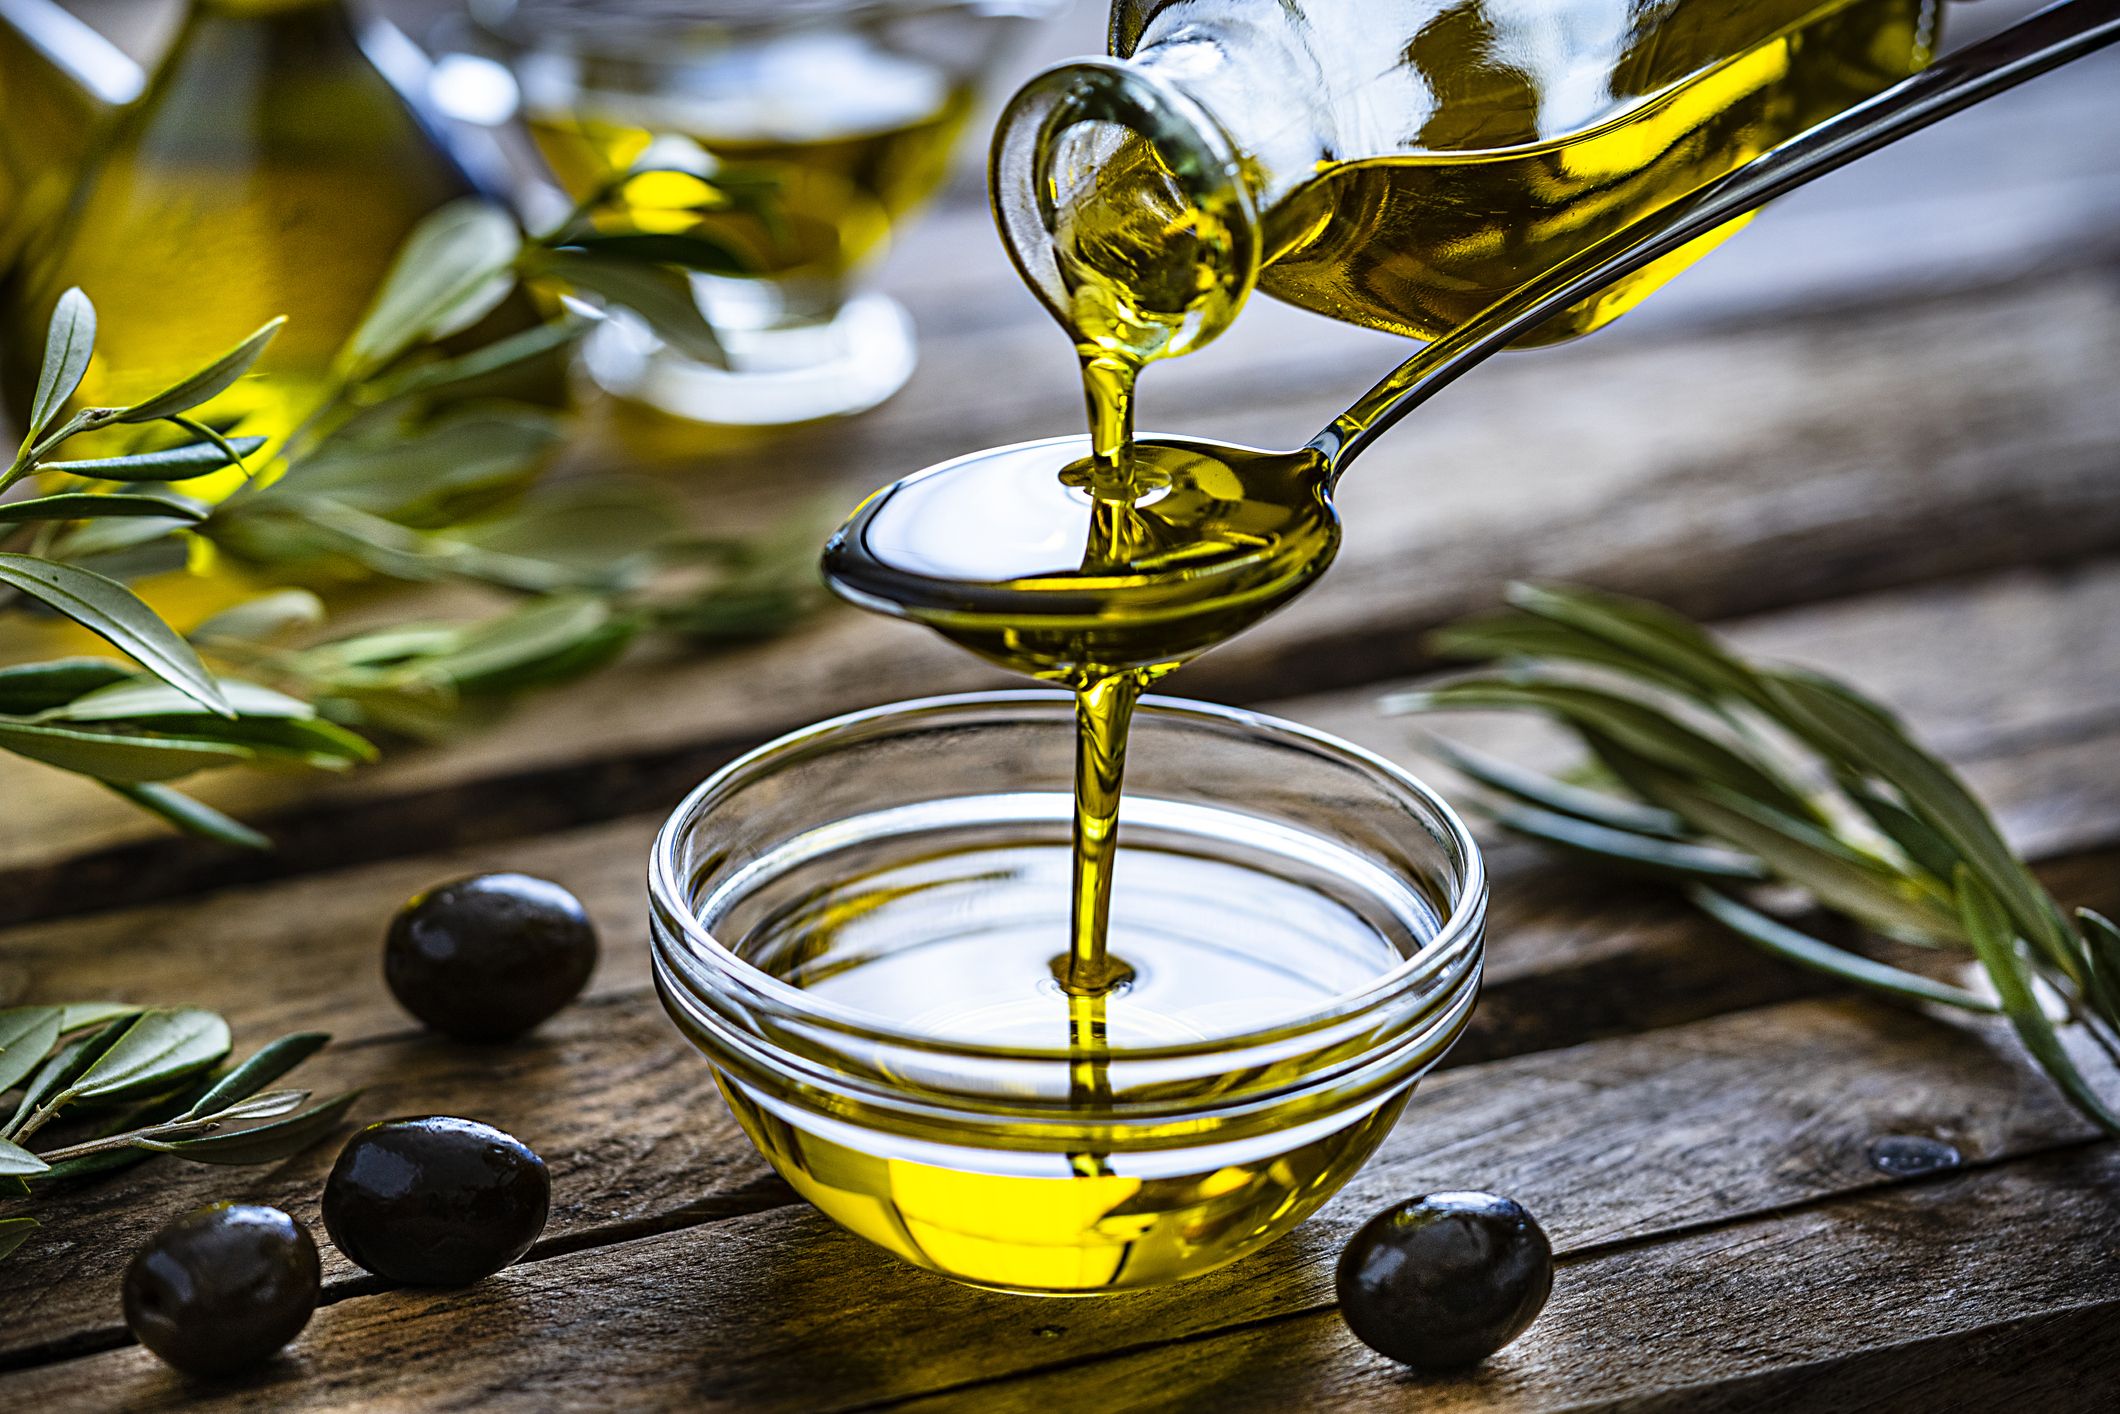 5 best healthy cooking oils, according to nutritionists—and which ones to avoid or use in moderation